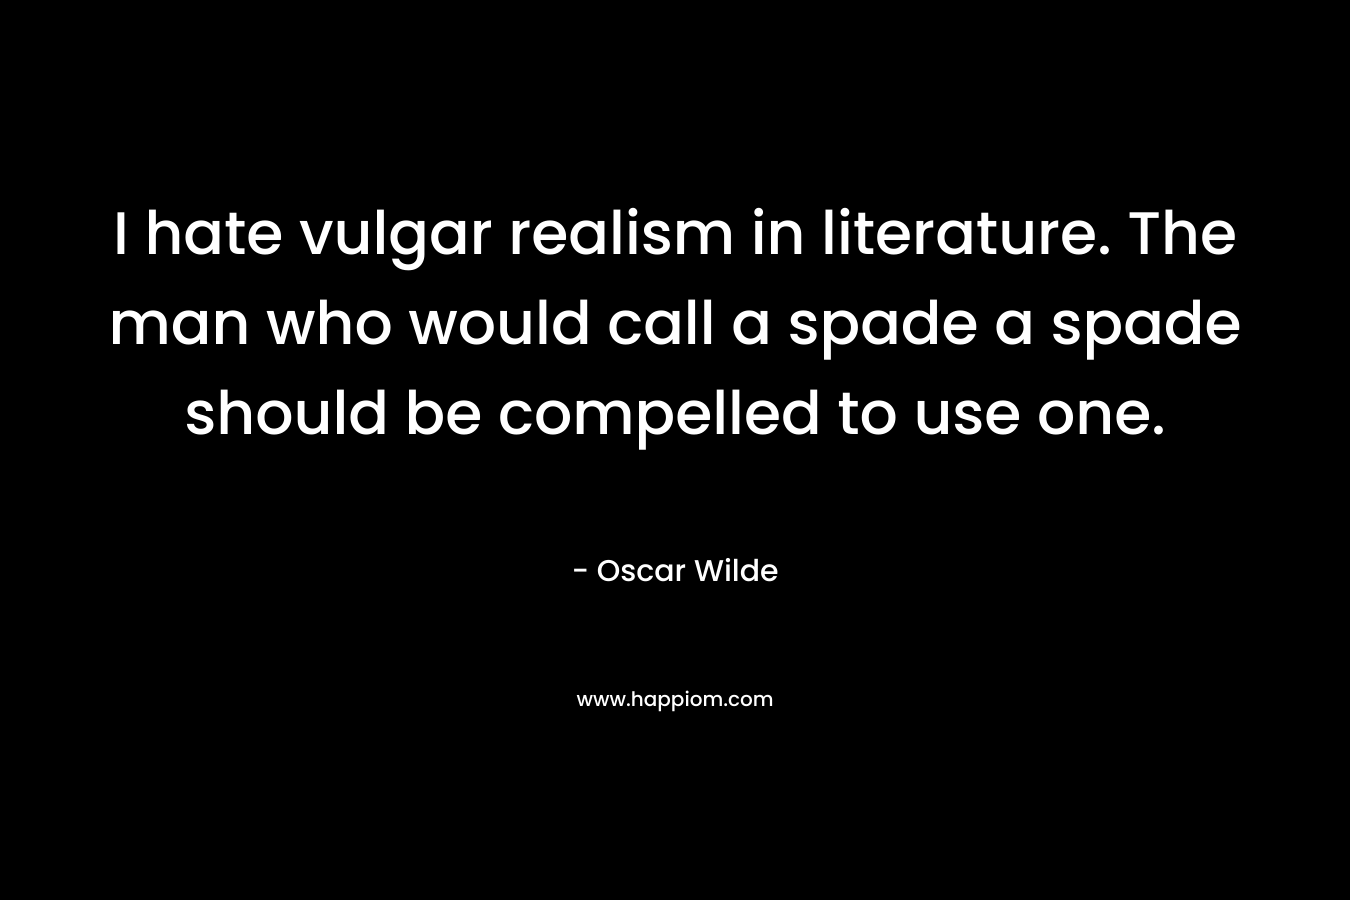 I hate vulgar realism in literature. The man who would call a spade a spade should be compelled to use one.